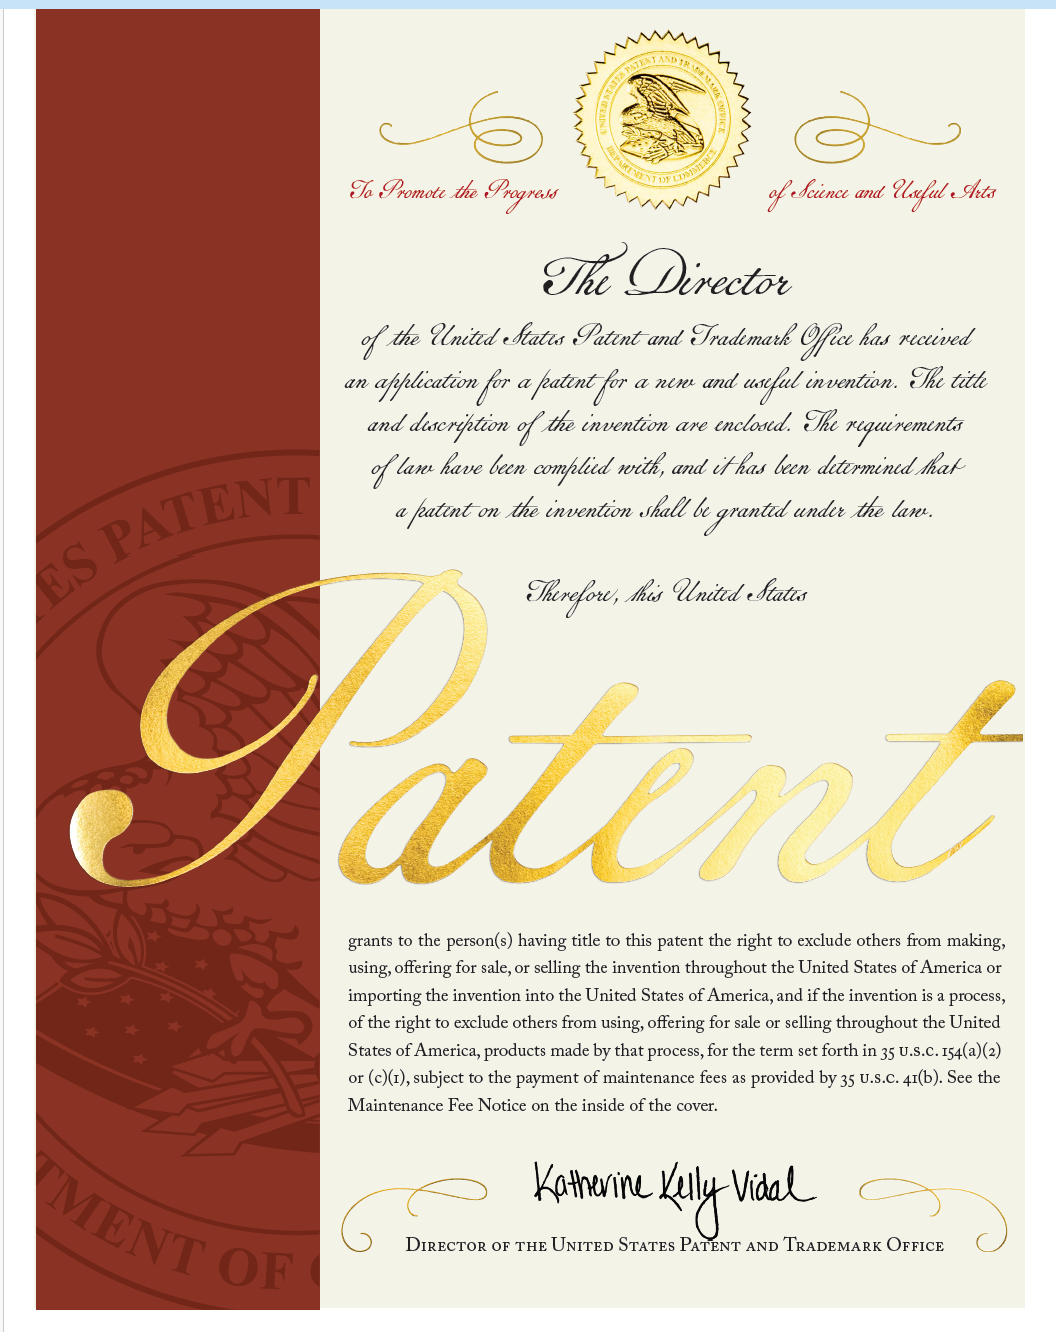 We got a U.S. patent for our invention